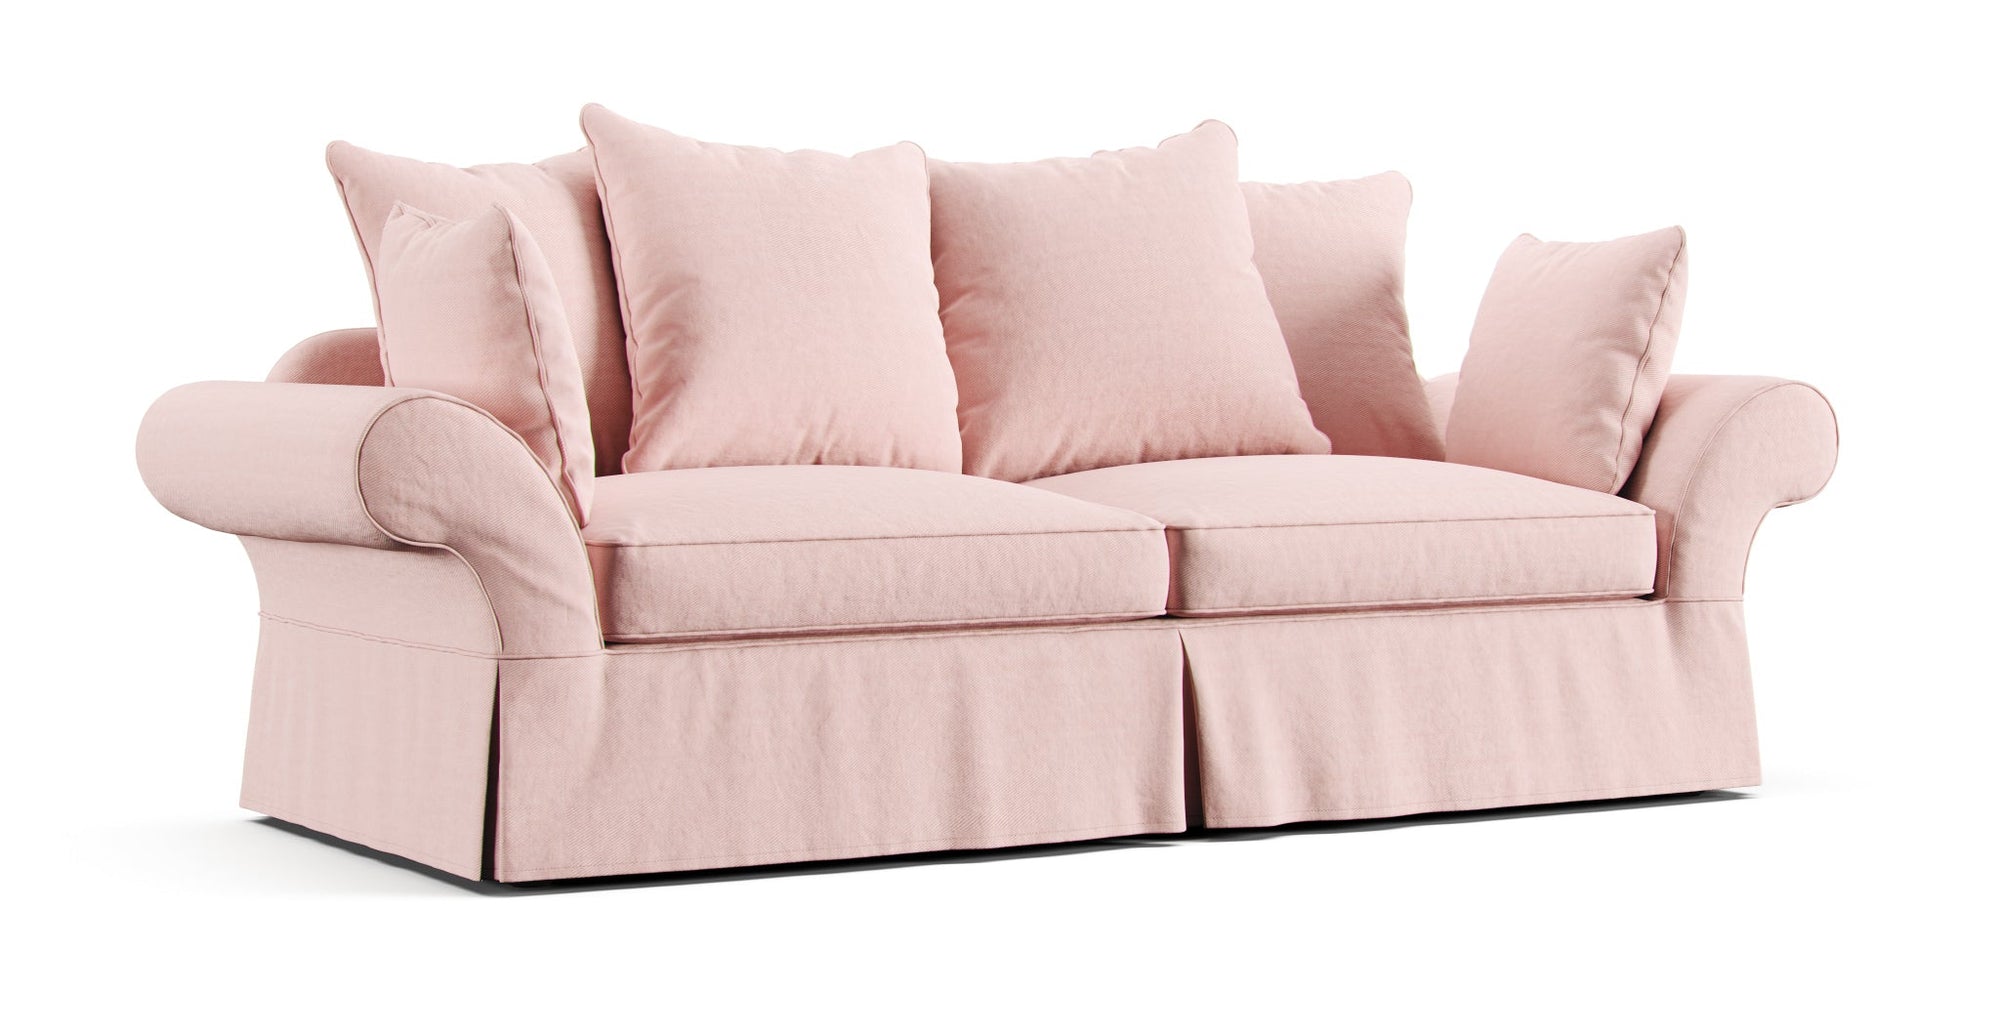 Pottery Barn Charleston sofa featuring pink brushed cotton slipcover